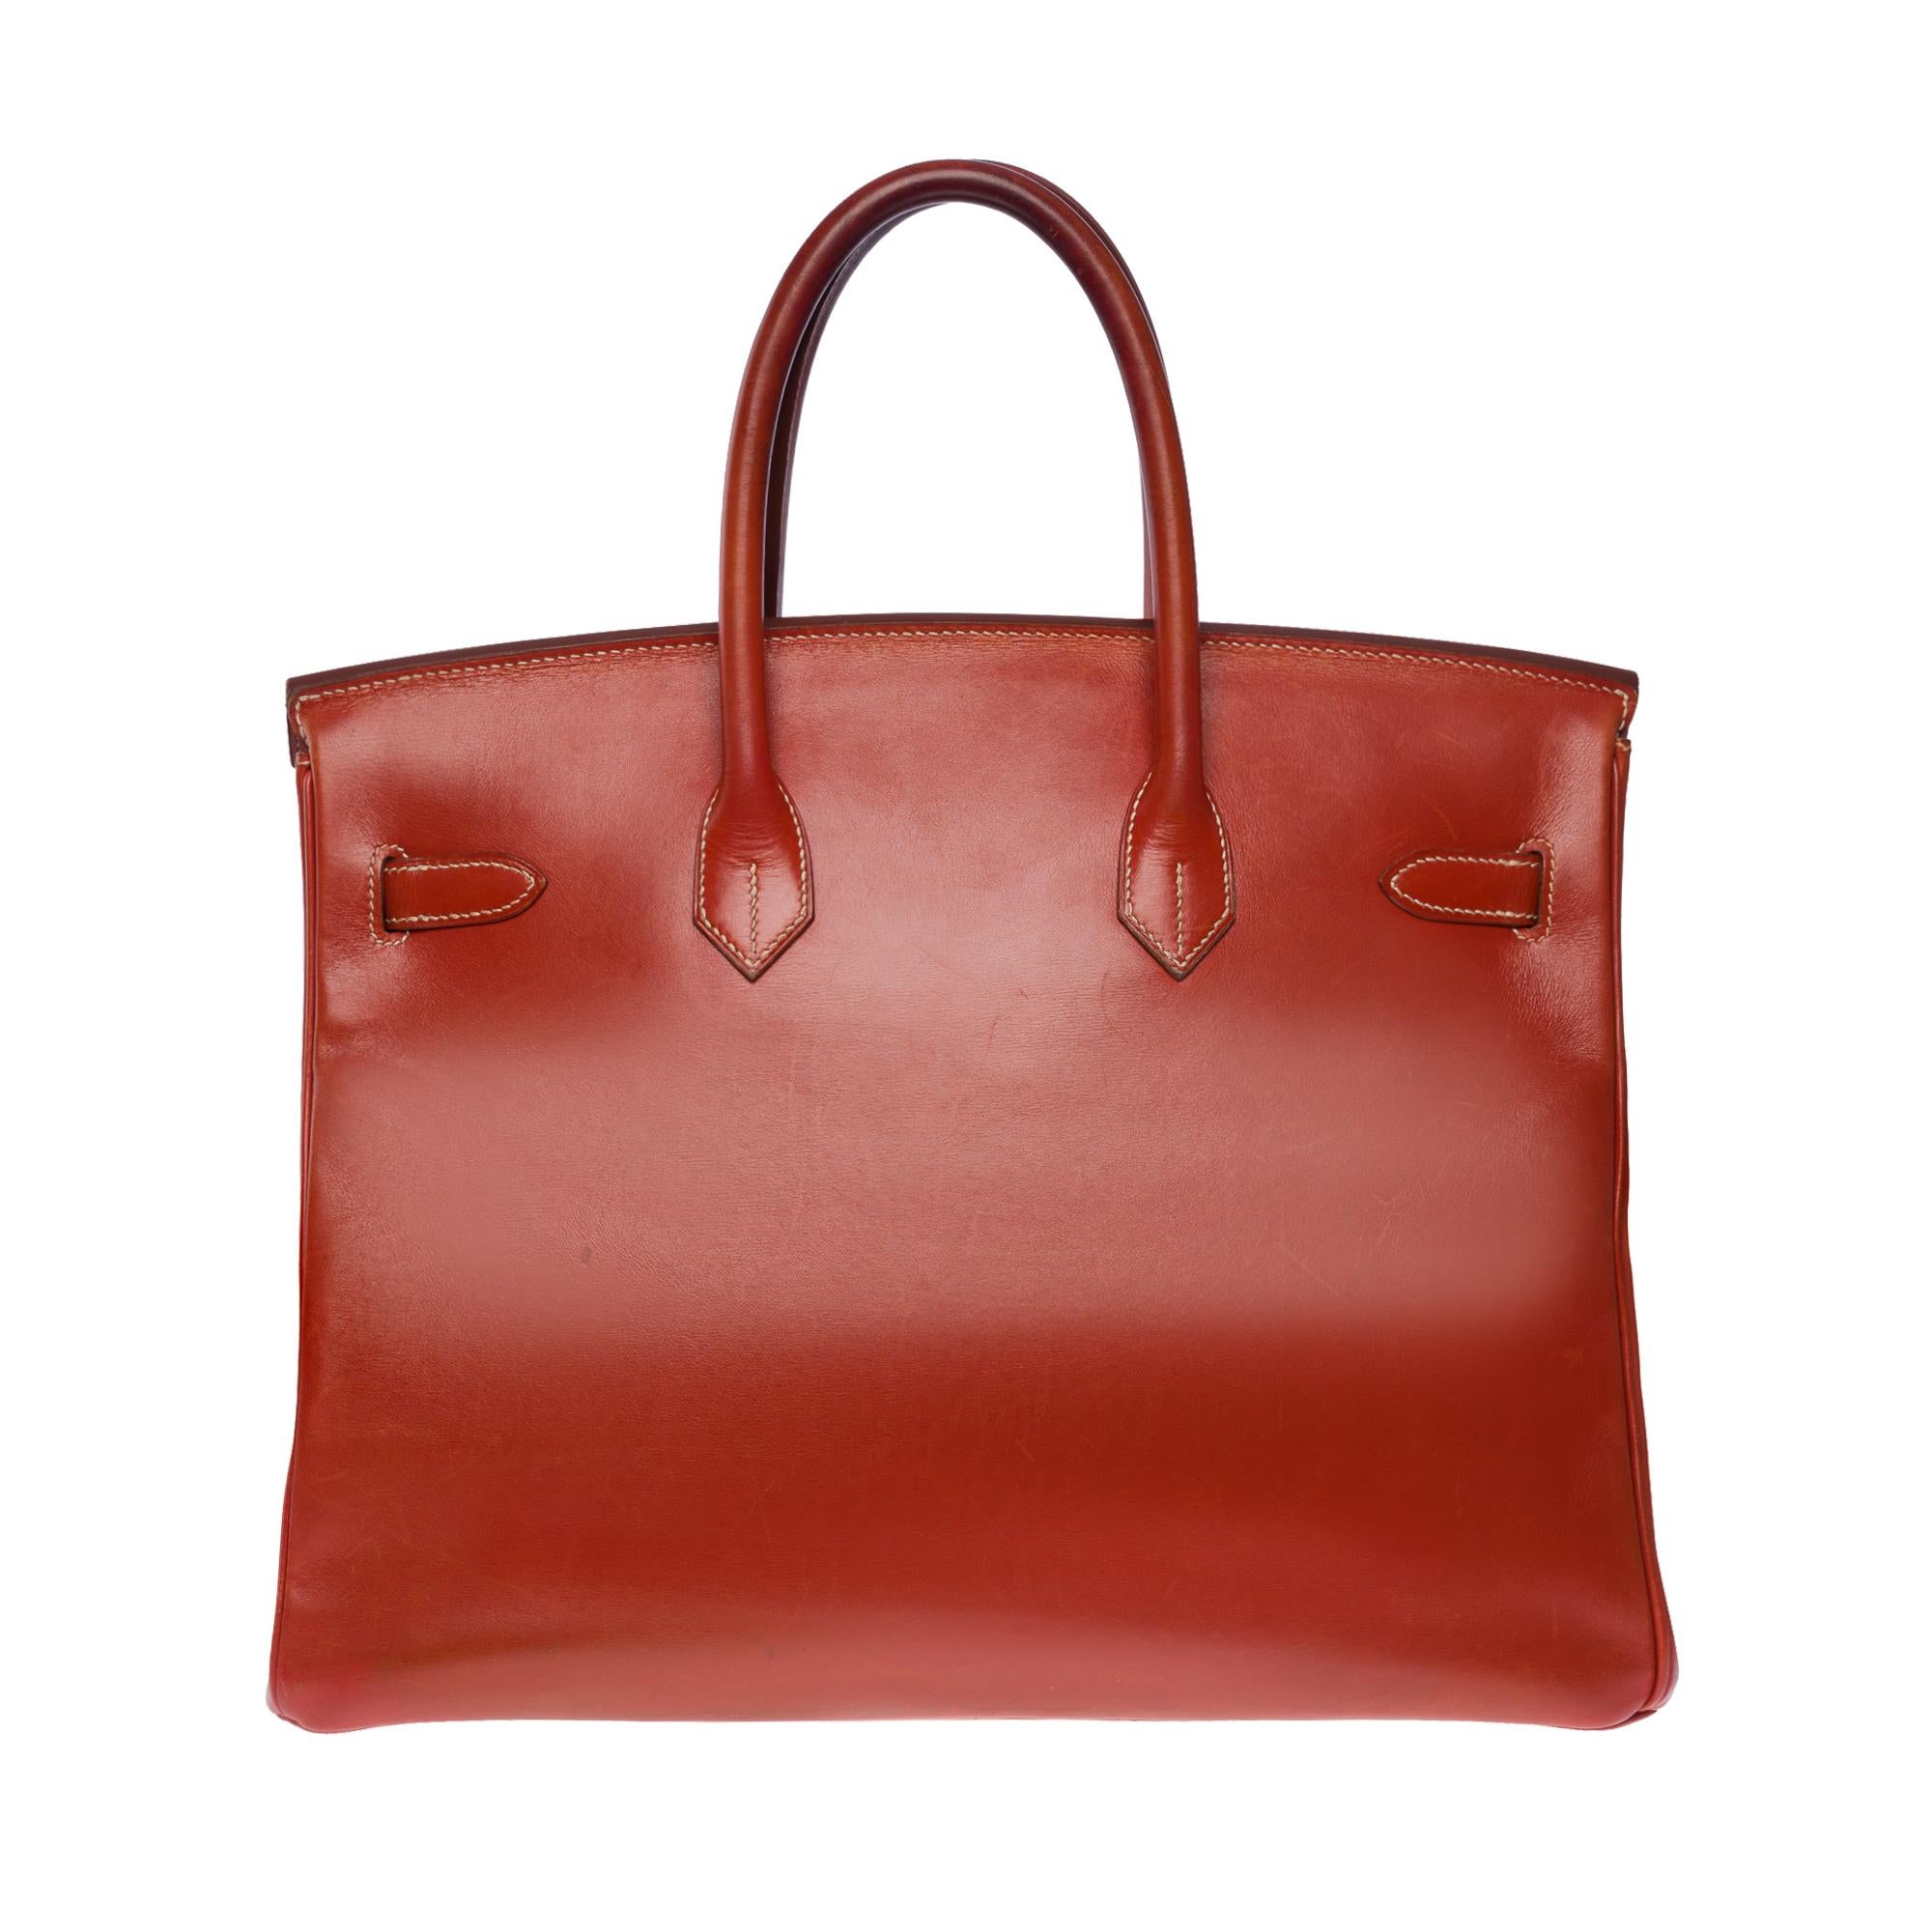 Exceptional & Very Rare Hermes Birkin 35 handbag in Cognac box calfskin, gold plated metal hardware, double handle in cognac box leather allowing a hand-carry

Flap closure
Cognac leather lining, one zippered pocket, one patch pocket
Signature: